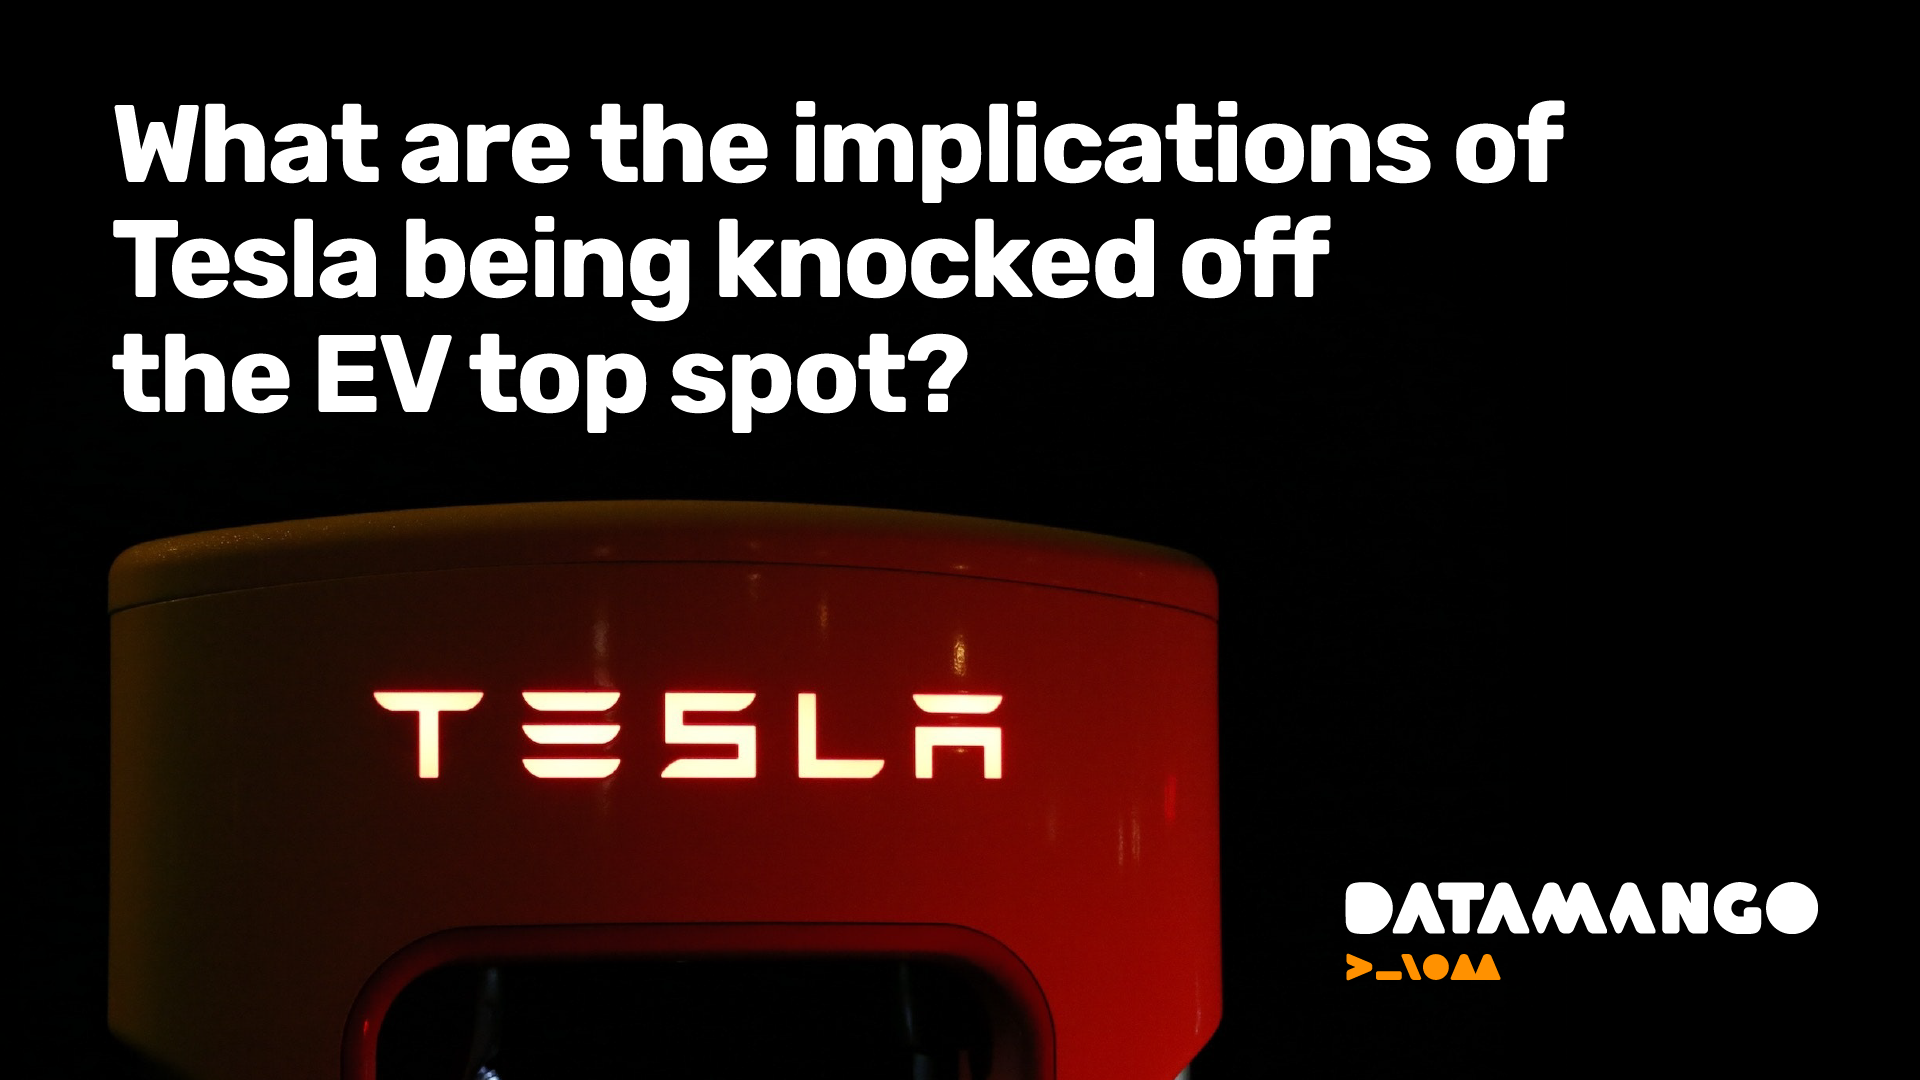 datamango-what-are-the-implications-of-tesla-being-knocked-off-the-electric-vehicle-top-spot